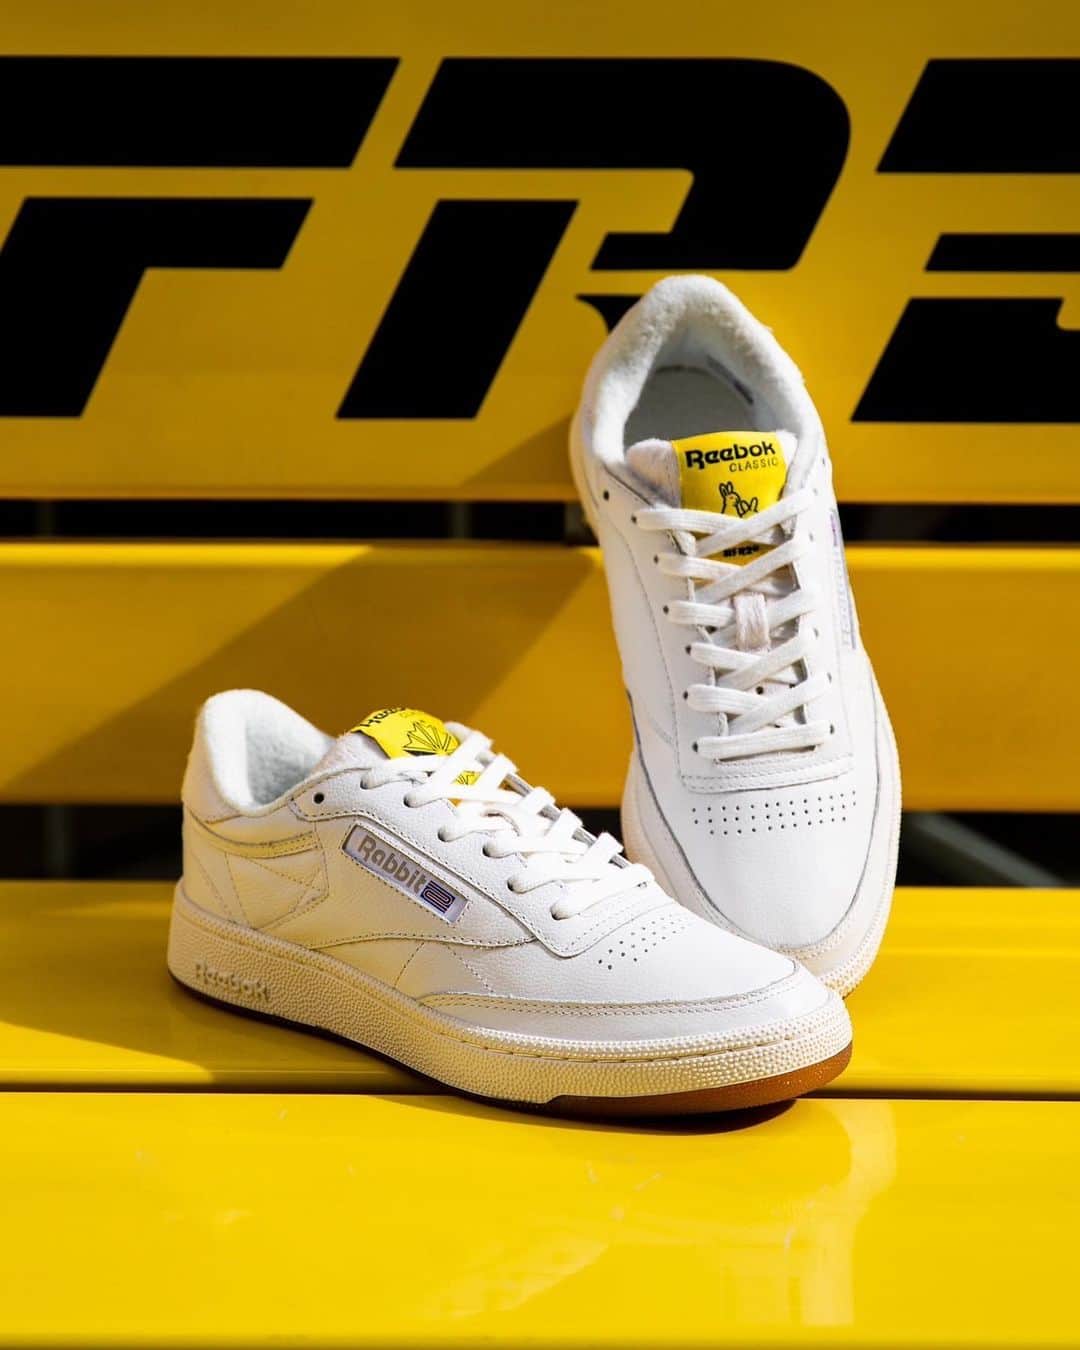 #FR2さんのインスタグラム写真 - (#FR2Instagram)「CLUB C, being Reebok’s one of the classic models, is definitely one of the popular signature models.  Born specifically for the tennis court in 1985 and was known as “Club Champion” back then.  With the high fitting and superior grip performance enabled by high-quality natural leather, this model has been active in the tennis scene since its release, and its versatility has made it popular for daily use, and it continues to be loved worldwide.  This model is the 3rd triple-collaboration amongst Reebok, atmos, and #FR2.   The entire upper is constructed from premium tumbled leather, and the distinctive heel and tongue area feature Harako. Furthermore, the heel part has #FR2’s iconic logo.  The outsole is made of clear gum sole, and the brand logo and message are printed on different left and right sides.  The insole features a special logo that combines the logos of three companies. This is an exclusive pair that is packed with #FR2-like playfulness throughout and is only available in Japan.  This model will be available on #FR2ONLINESTORE,and at our #FR2 stores on Saturday, November 18th, 2023. *For purchases at physical stores, there may be certain purchase limitations / restrictions.  Reebok定番のクラシックモデルとして人気のCLUB C 。 1985年にテニス専用のコートシューズとして誕生し、発売当初はクラブチャンピオンというネームで親しまれていました。 高級天然皮革による高いフィッティングと優れたグリップ性能により、発売当時からテニスシーンでも活躍し、その汎用性の高さからデイリーユースでも親しまれており、今尚ワールドワイドで愛され続けているモデルです。 今回のモデルは、Reebok × atmosに加え、#FR2 を迎えたトリプルコラボレーション第三弾となっております。 アッパー全体をプレミアムなタンブルレザーで構築し、特徴的なヒール、シュータン部分にはハラコを採用。更にヒール部分には #FR2 のアイコニックなロゴが刻印されています。 アウトソールにはクリアのガムソールを採用し、左右違いでブランドロゴとメッセージがプリントされております。 インソールには3社のロゴを組み合わせたスペシャルロゴを採用。 随所に#FR2 らしい遊び心が詰まった今作は日本国内限定発売です。  こちらの商品は#FR2ONLINESTORE、#FR2各店にて2023 / 11/ 18（Sat）からの発売になります。 ※店舗での発売は購入制限を儲ける場合があります。  #FR2#fxxkingrabbits#頭狂色情兎#atmos #Reebok」11月9日 20時40分 - fxxkingrabbits